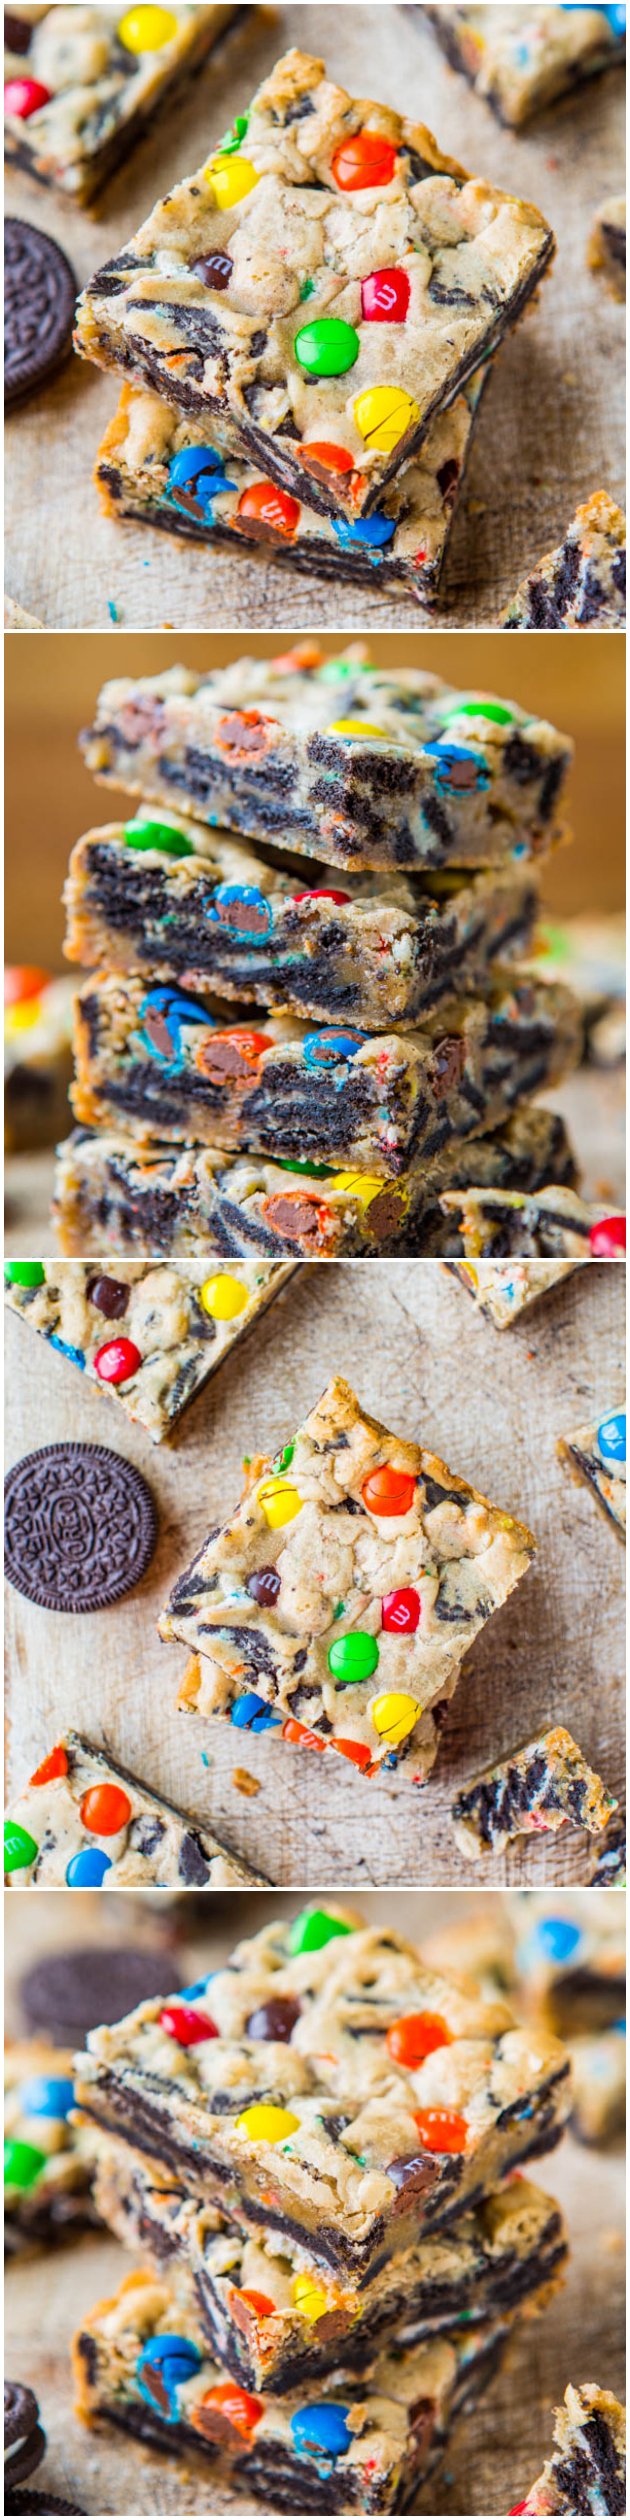 Loaded M&M Oreo Cookie Bars - Stuffed to the max with M&Ms and Oreos! Easy, no-mixer recipe that's ready in 30 minutes. Always a hit at parties!